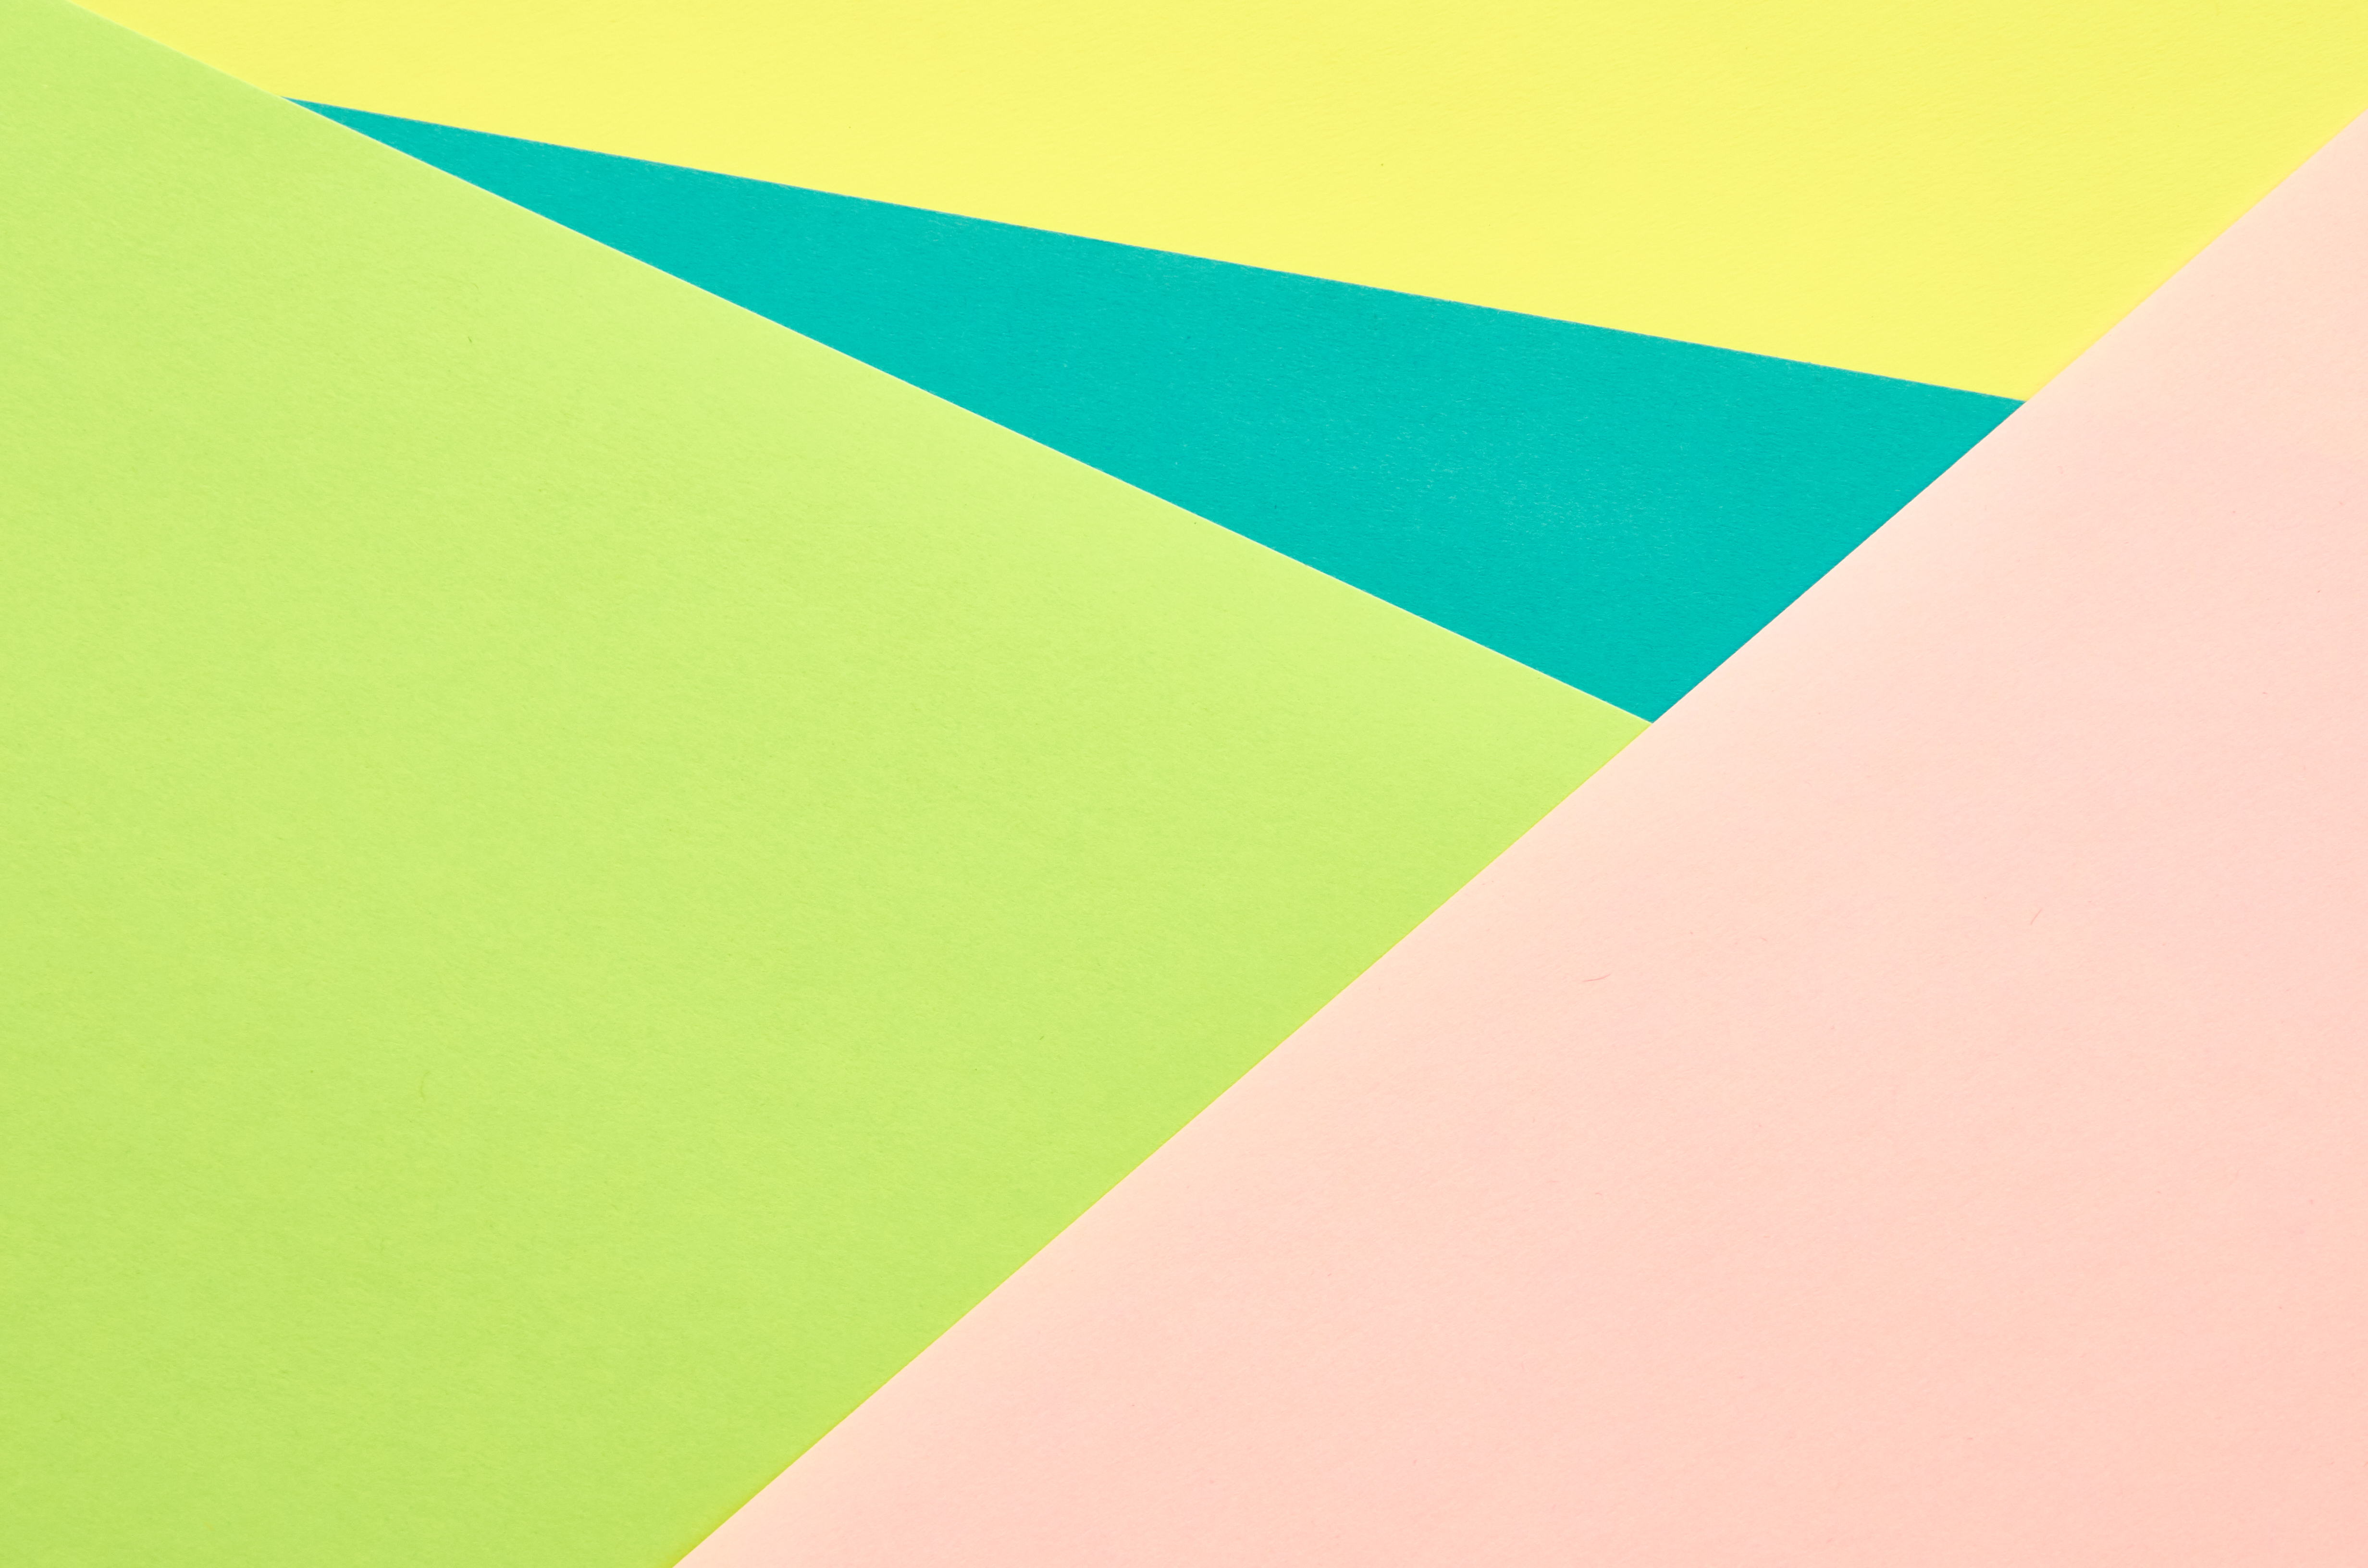 motley, multicolored, abstract, shape, shapes, triangles, fragments 1080p